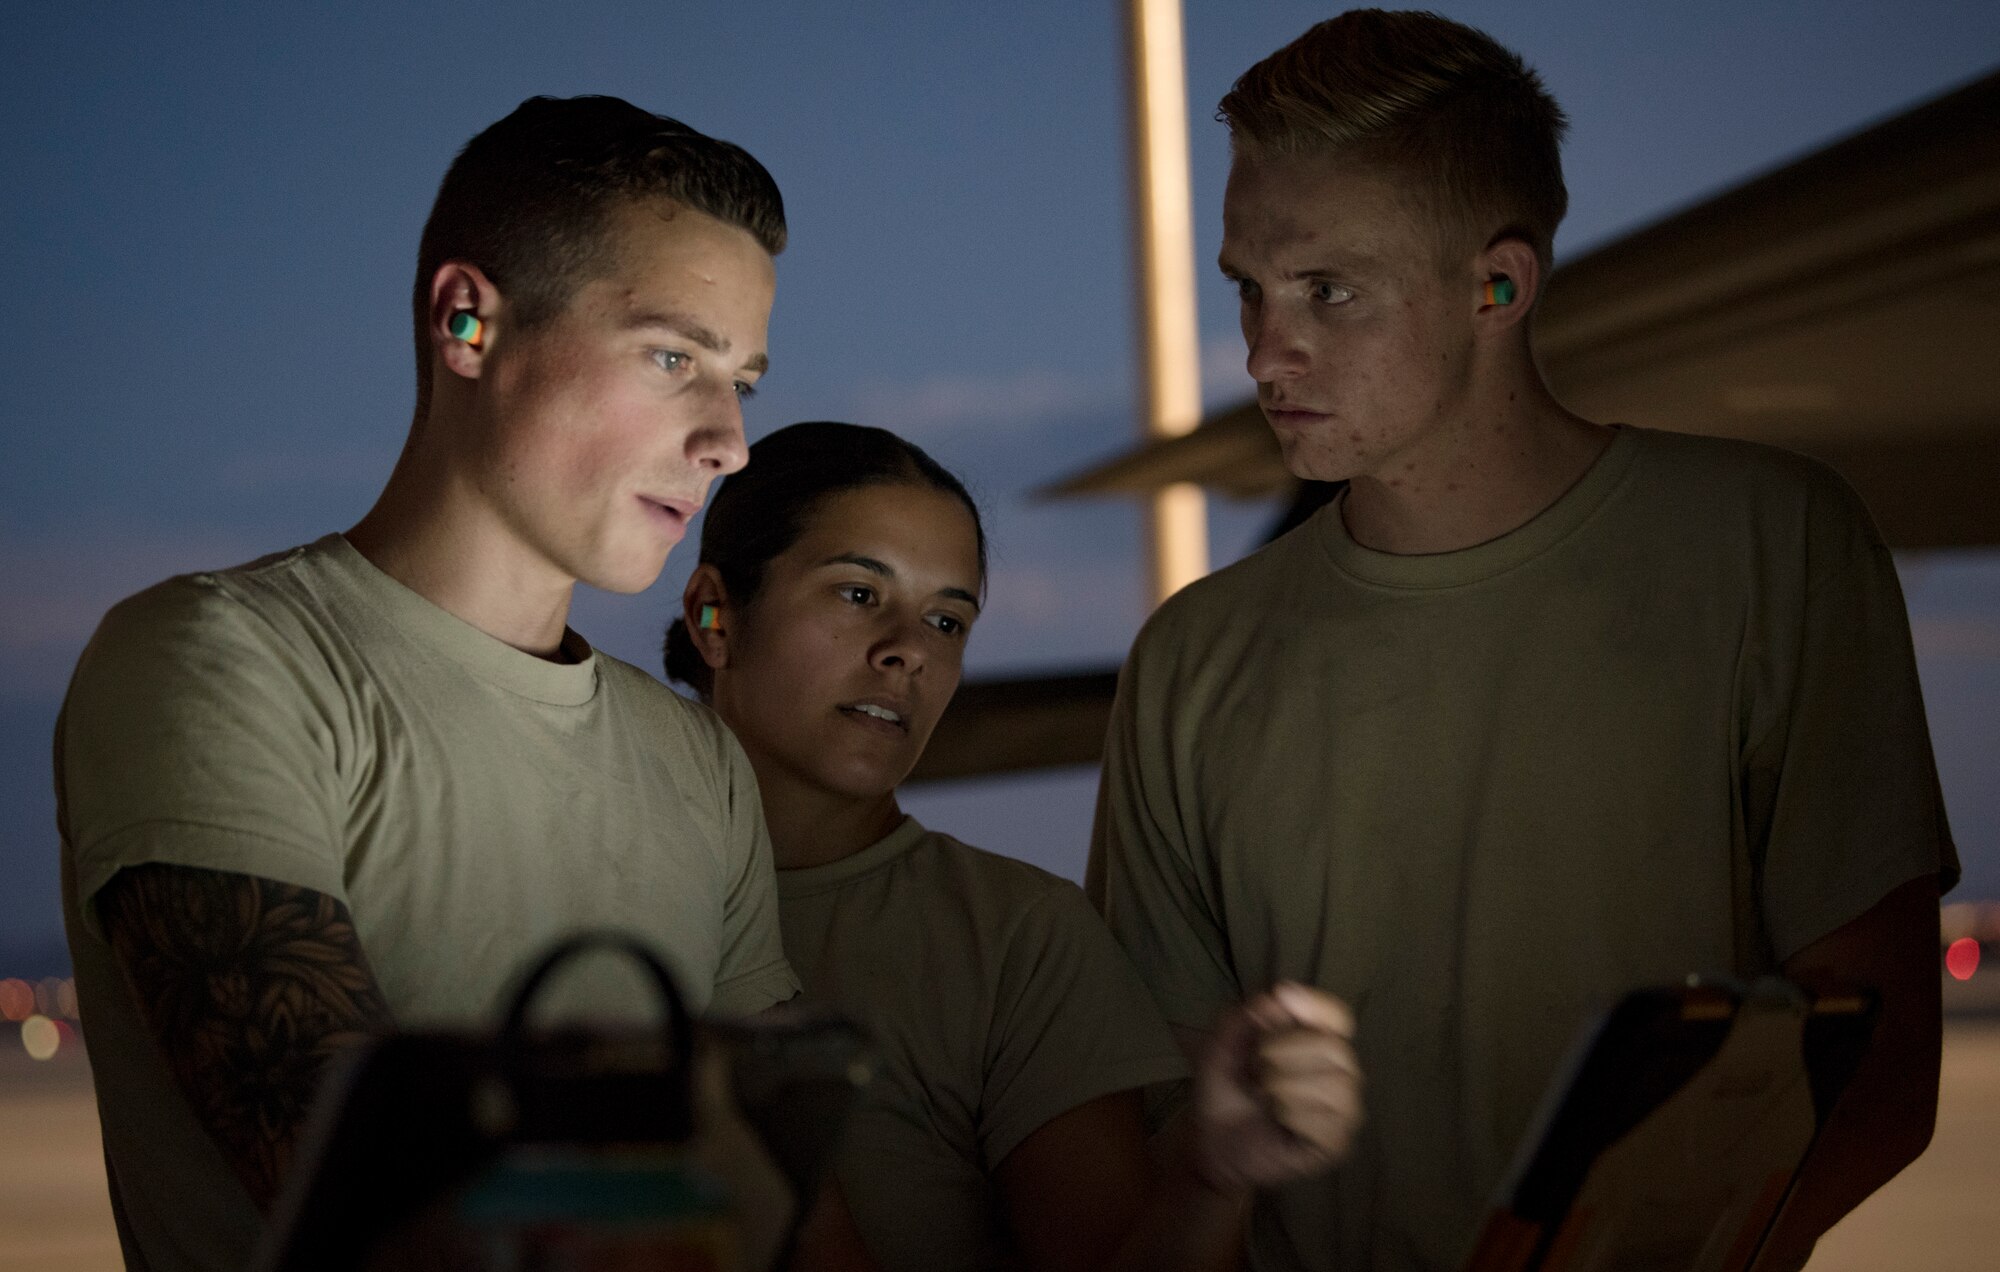 Senior Airman Alan Roach, Staff Sgt. Samantha Stimeling and Airman 1st Class Nolan Delongey, 57th Aircraft Maintenance Squadron Lightning Aircraft Maintenance Unit armament systems technicians, perform tests on an F-35A Lightning II fighter jet at Nellis Air Force Base, Nevada, July 24, 2018. Armament systems technicians frequently test and evaluate the weapon systems on aircraft to ensure everything is in working order. (U.S. Air Force photo by Airman 1st Class Andrew D. Sarver)